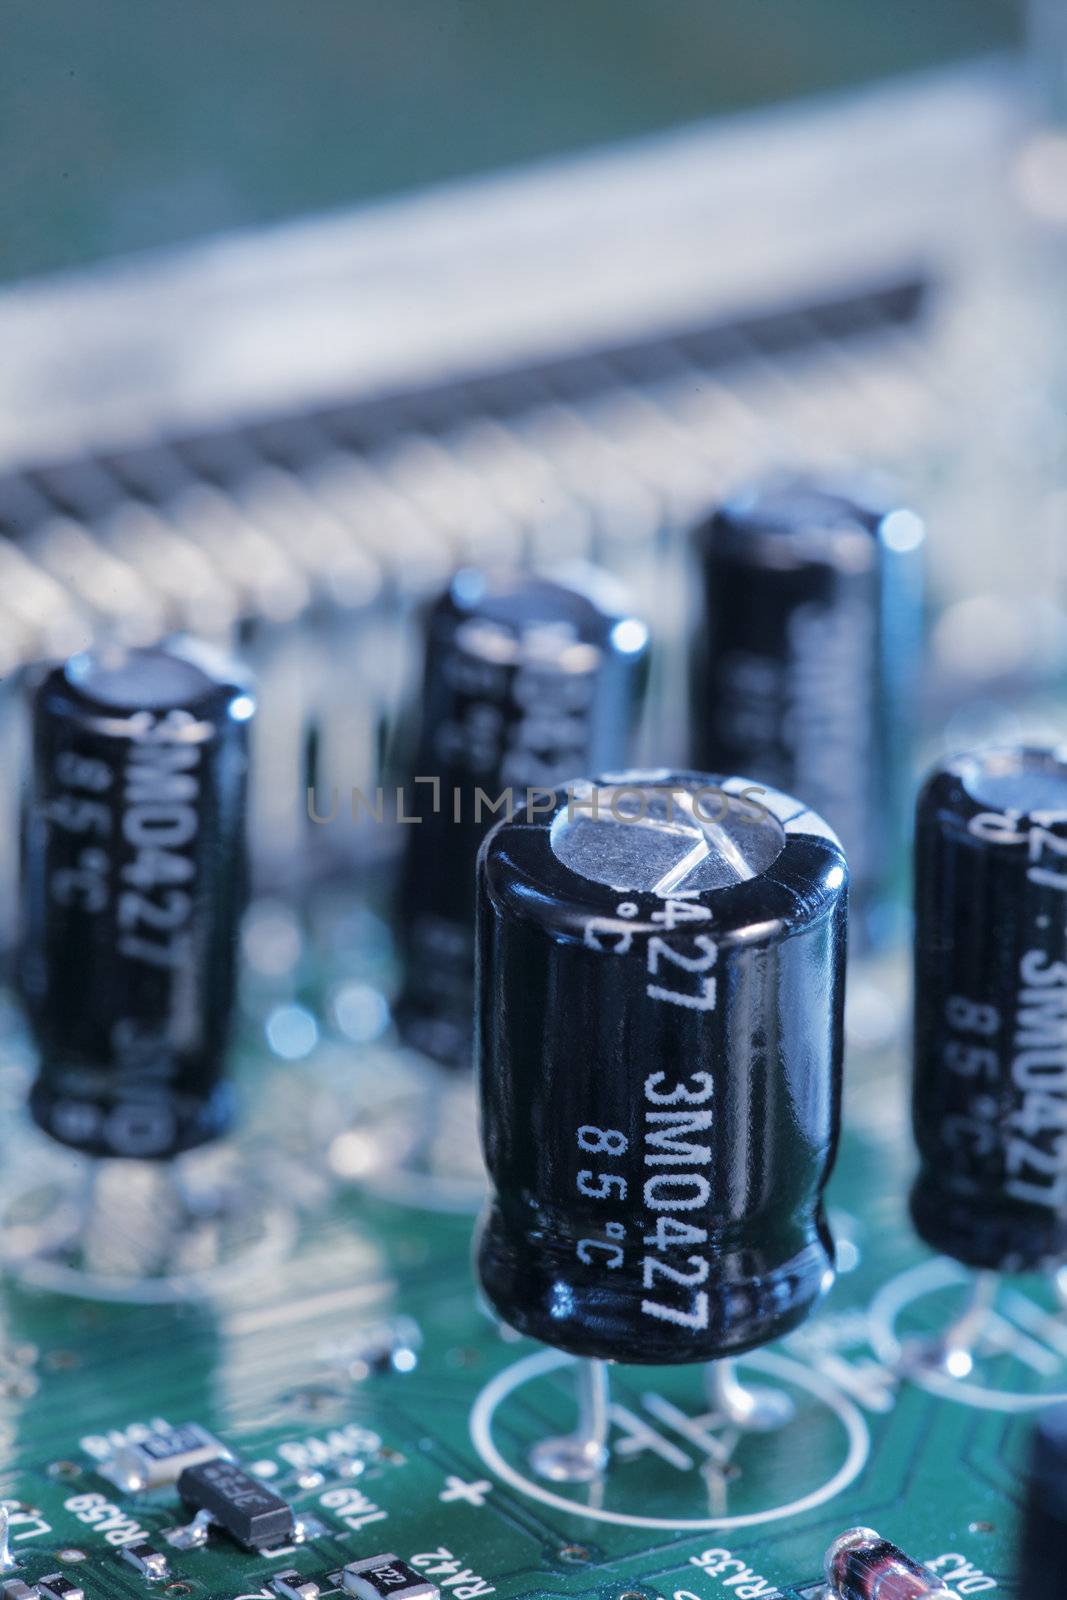 Capacitors on a circuit board. The text on the components is NOT manufacturer's logo.